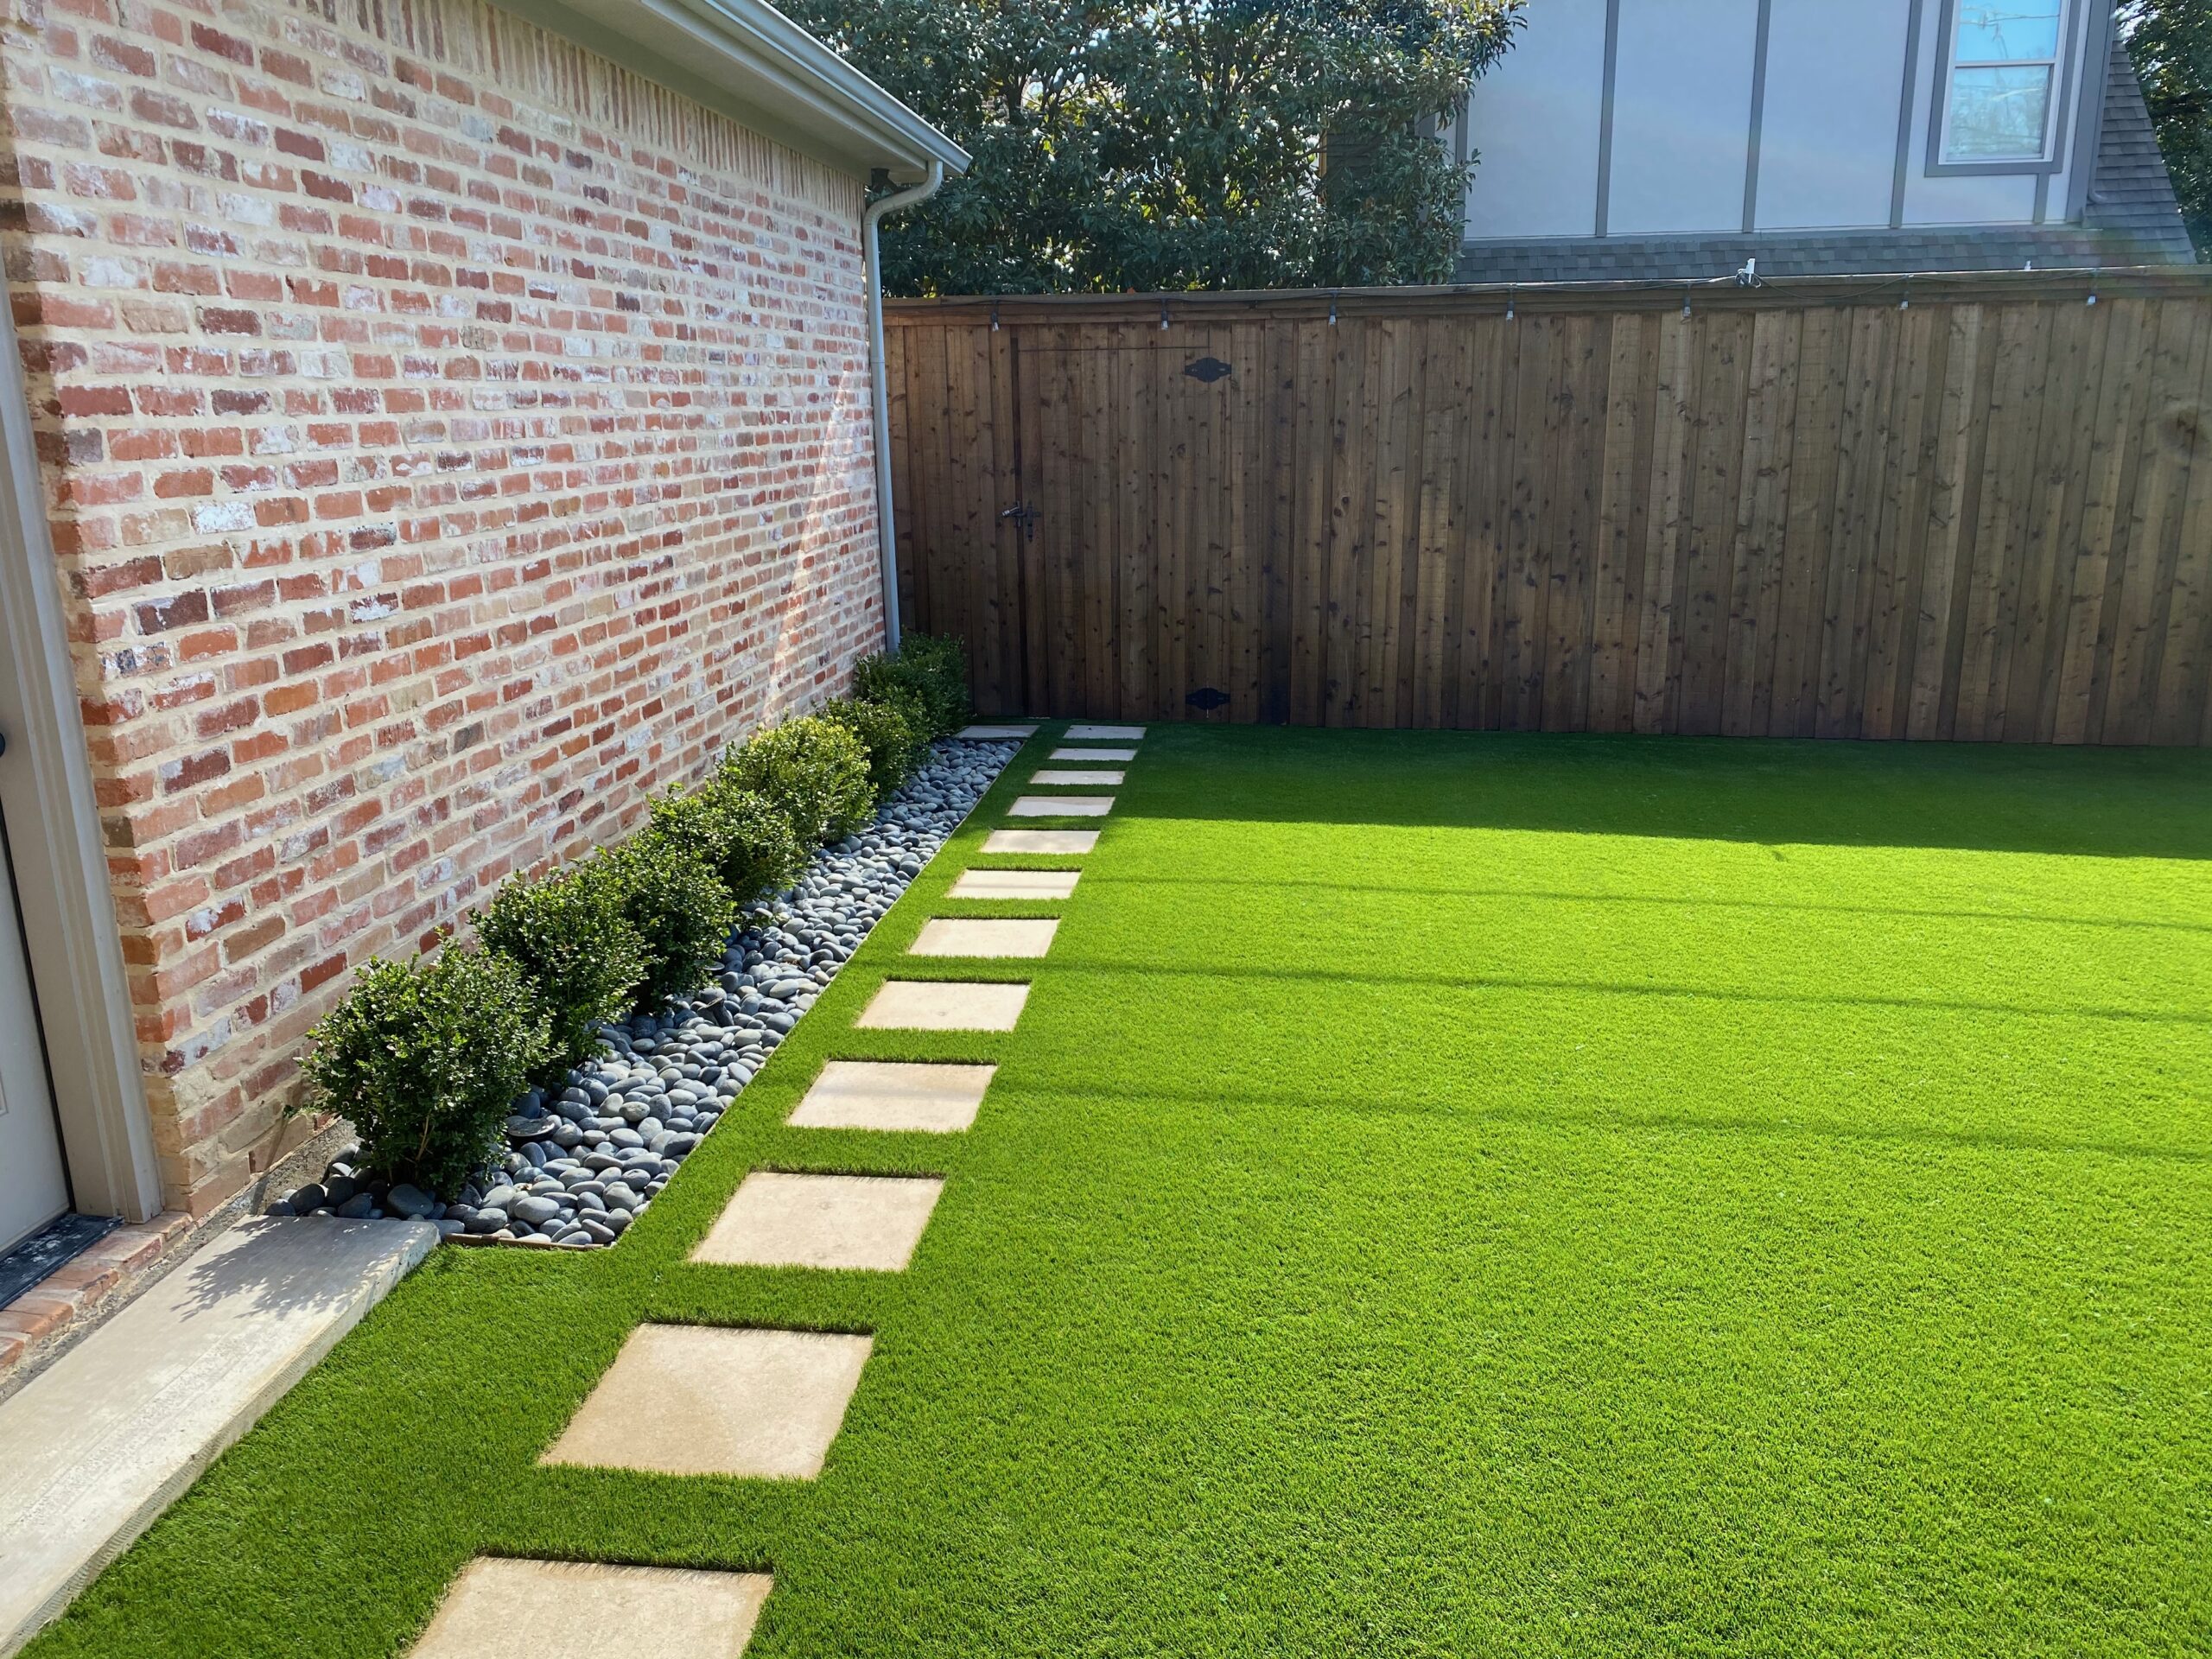 Ways To Use Artificial Grass Carpet As Part Of Your Home Decoration